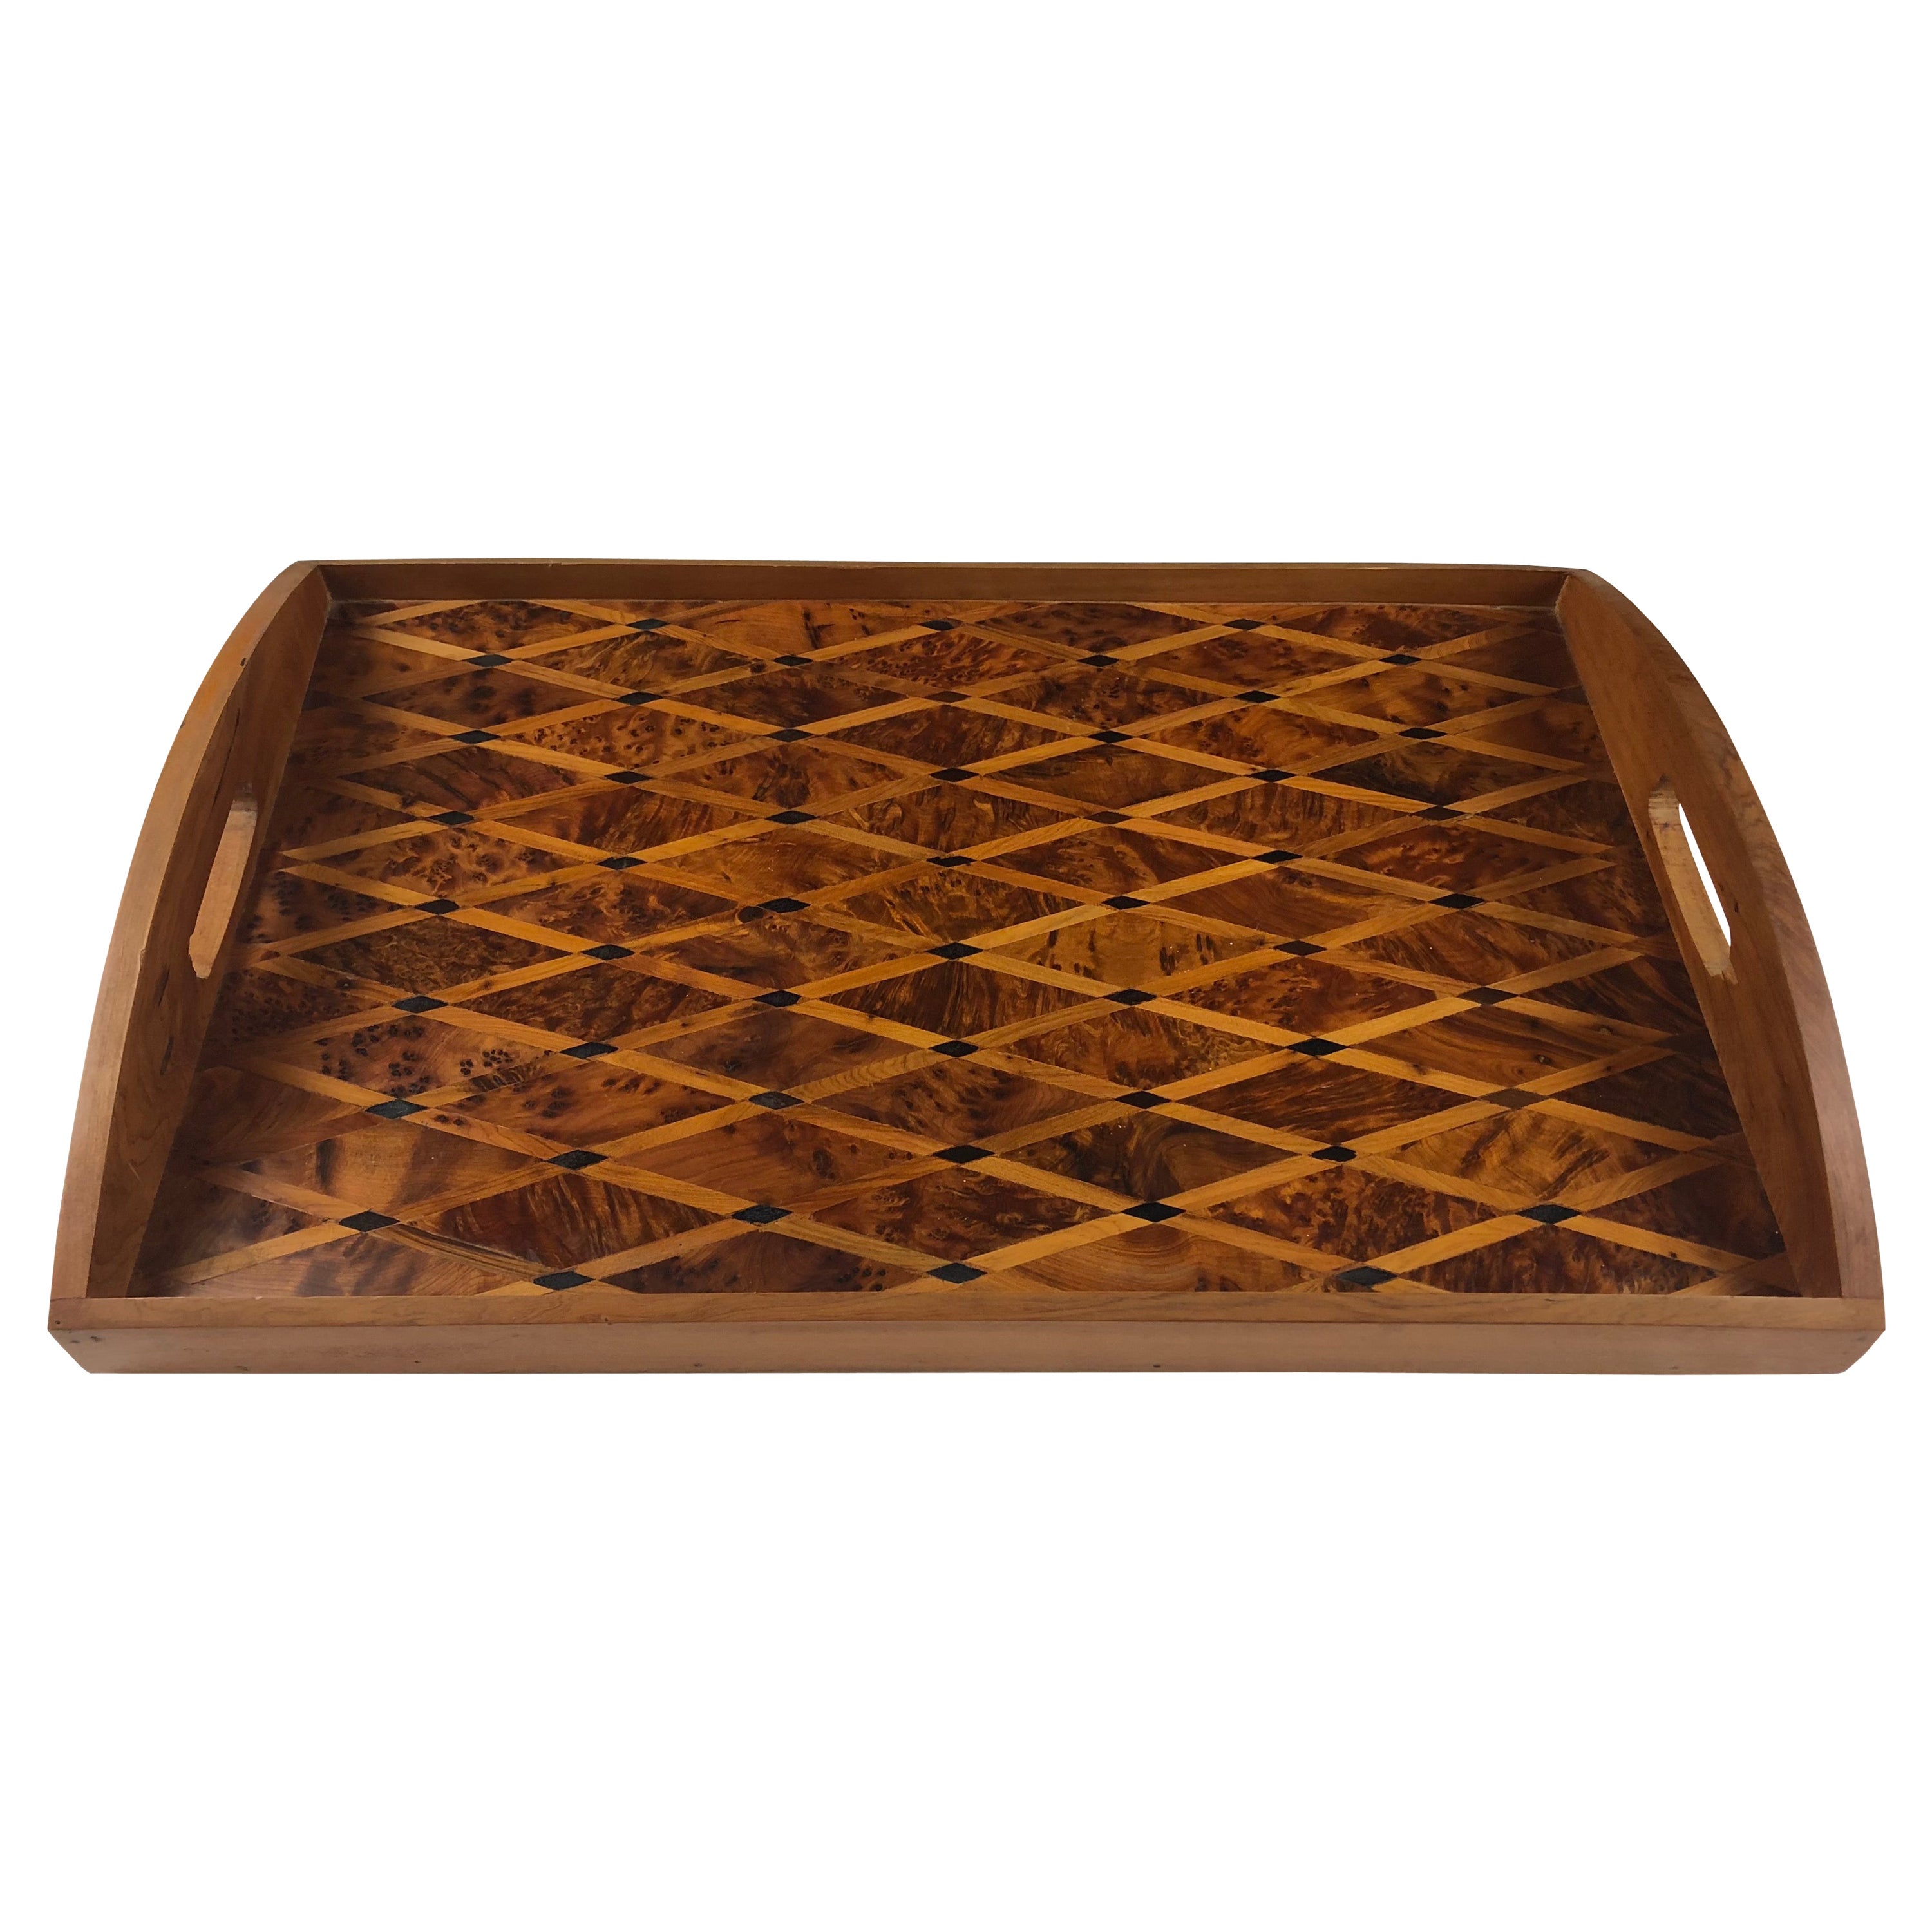 French Art Deco Style Serving Tray